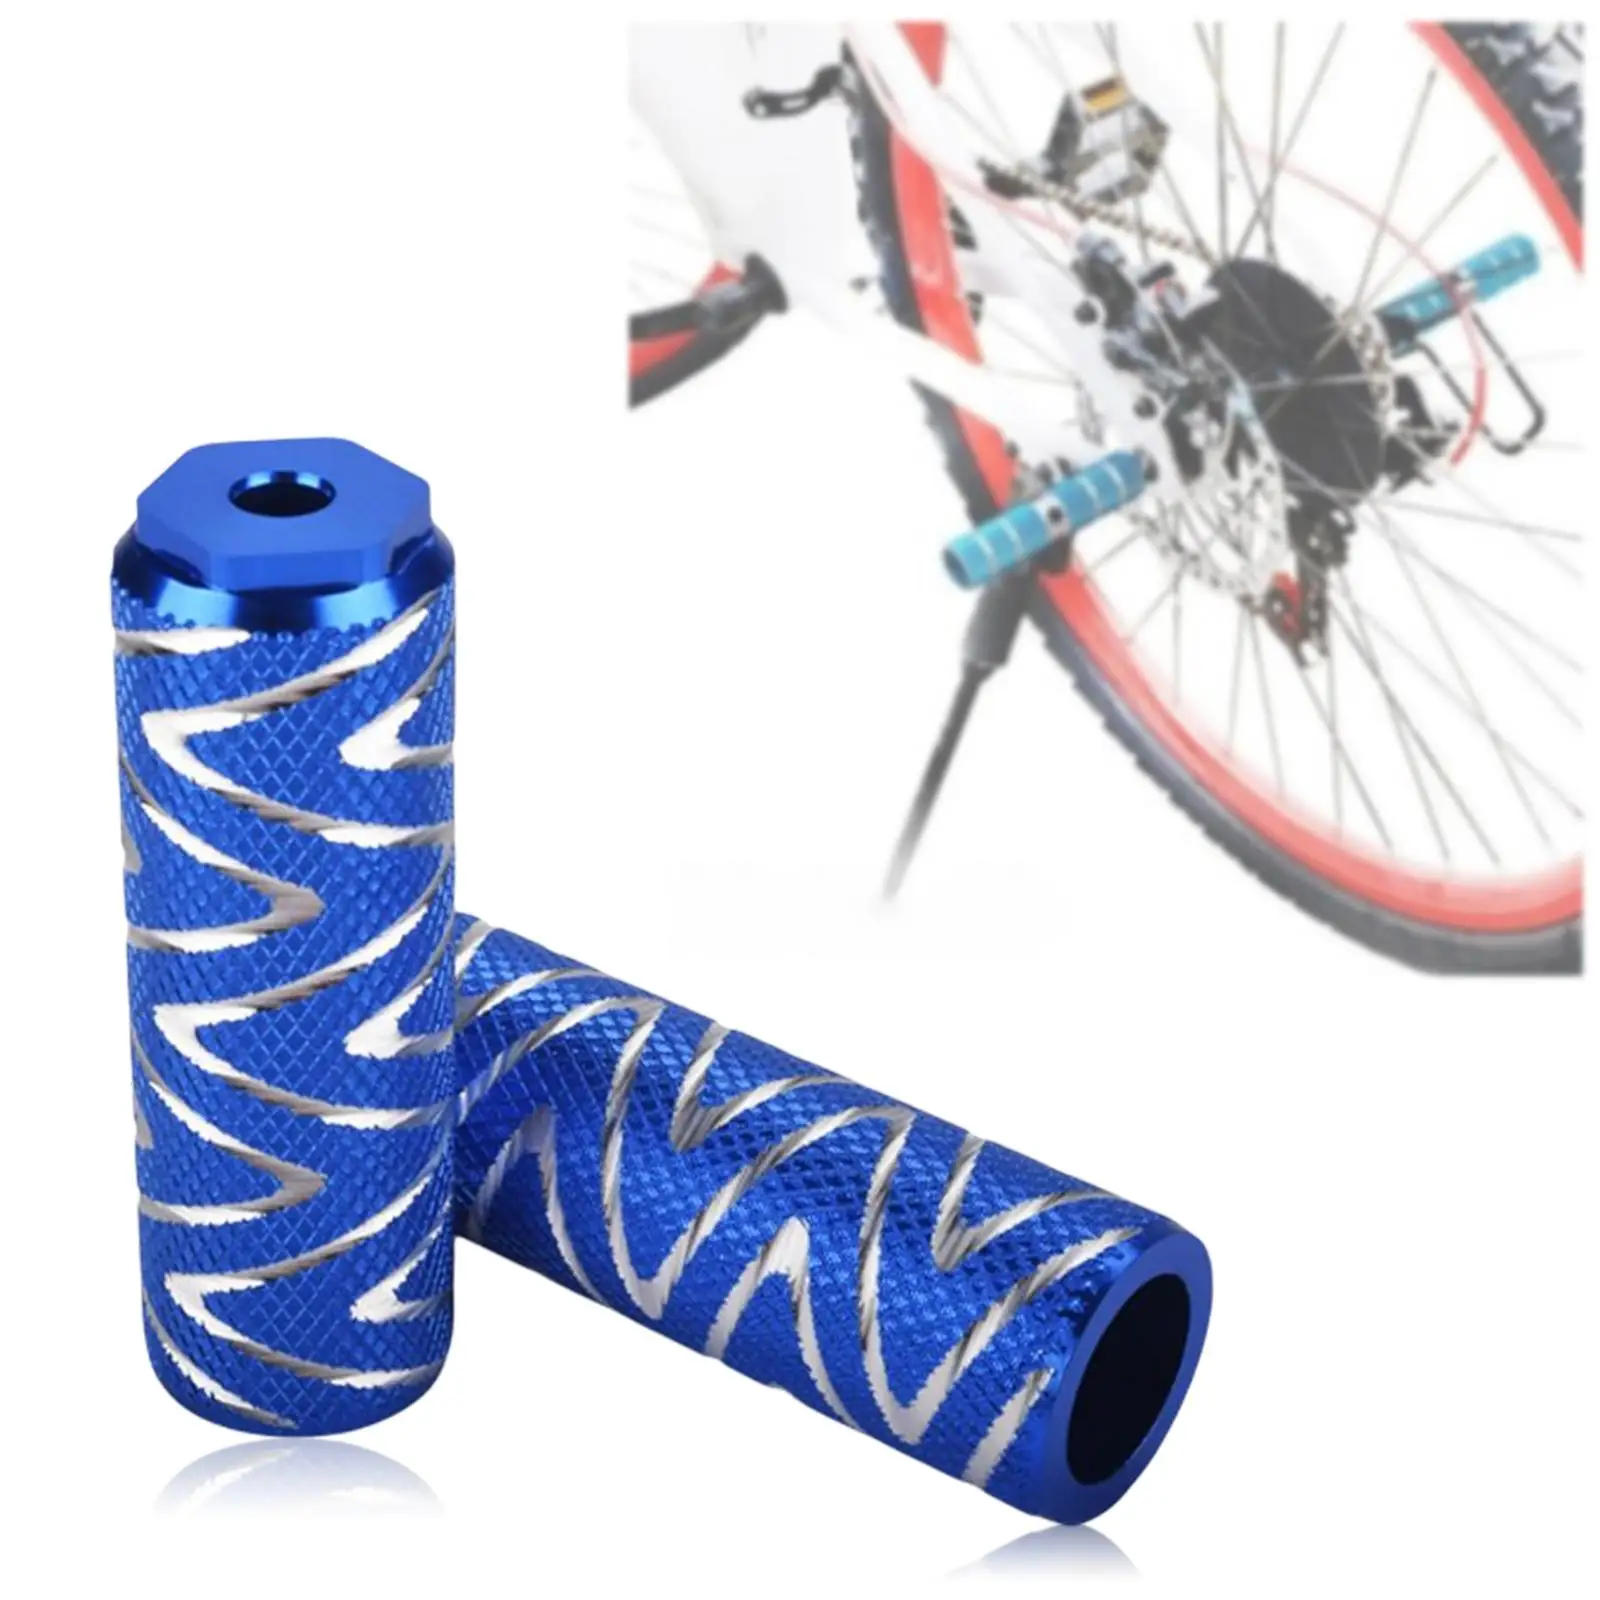 1 Pair Bike Pegs Anti-Skid  Axle Pegs Footrests Foot Pegs for Rear Wheels, Durable and Stylish Non-Slip